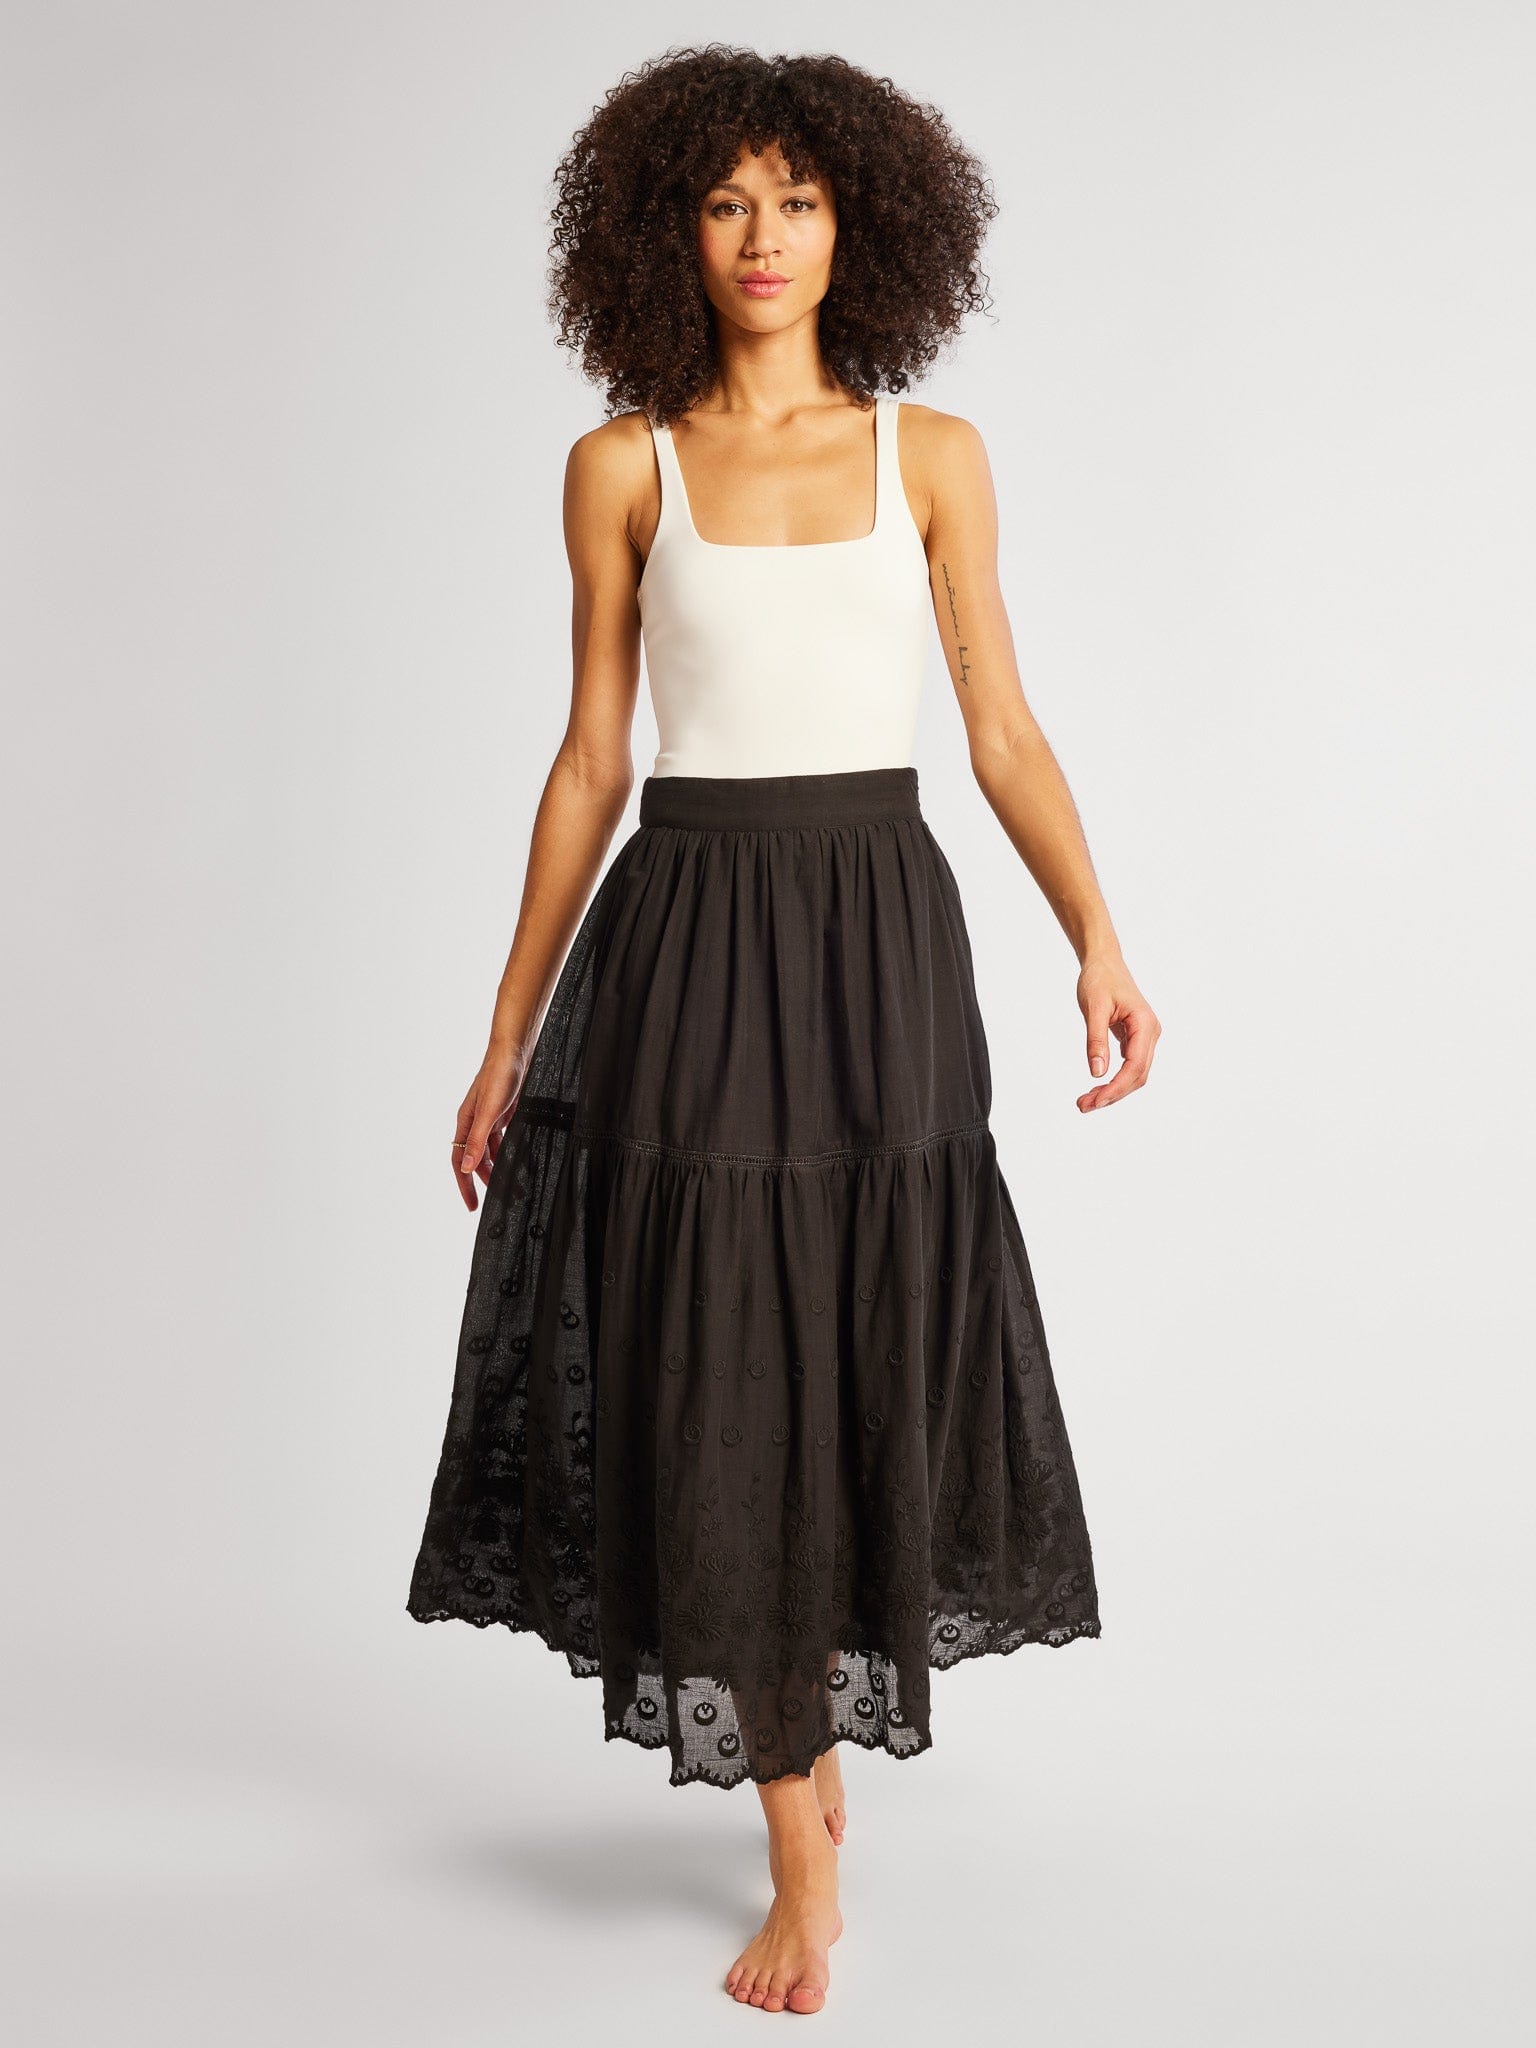 MILLE Clothing Betty Skirt in Black Petal Embroidery